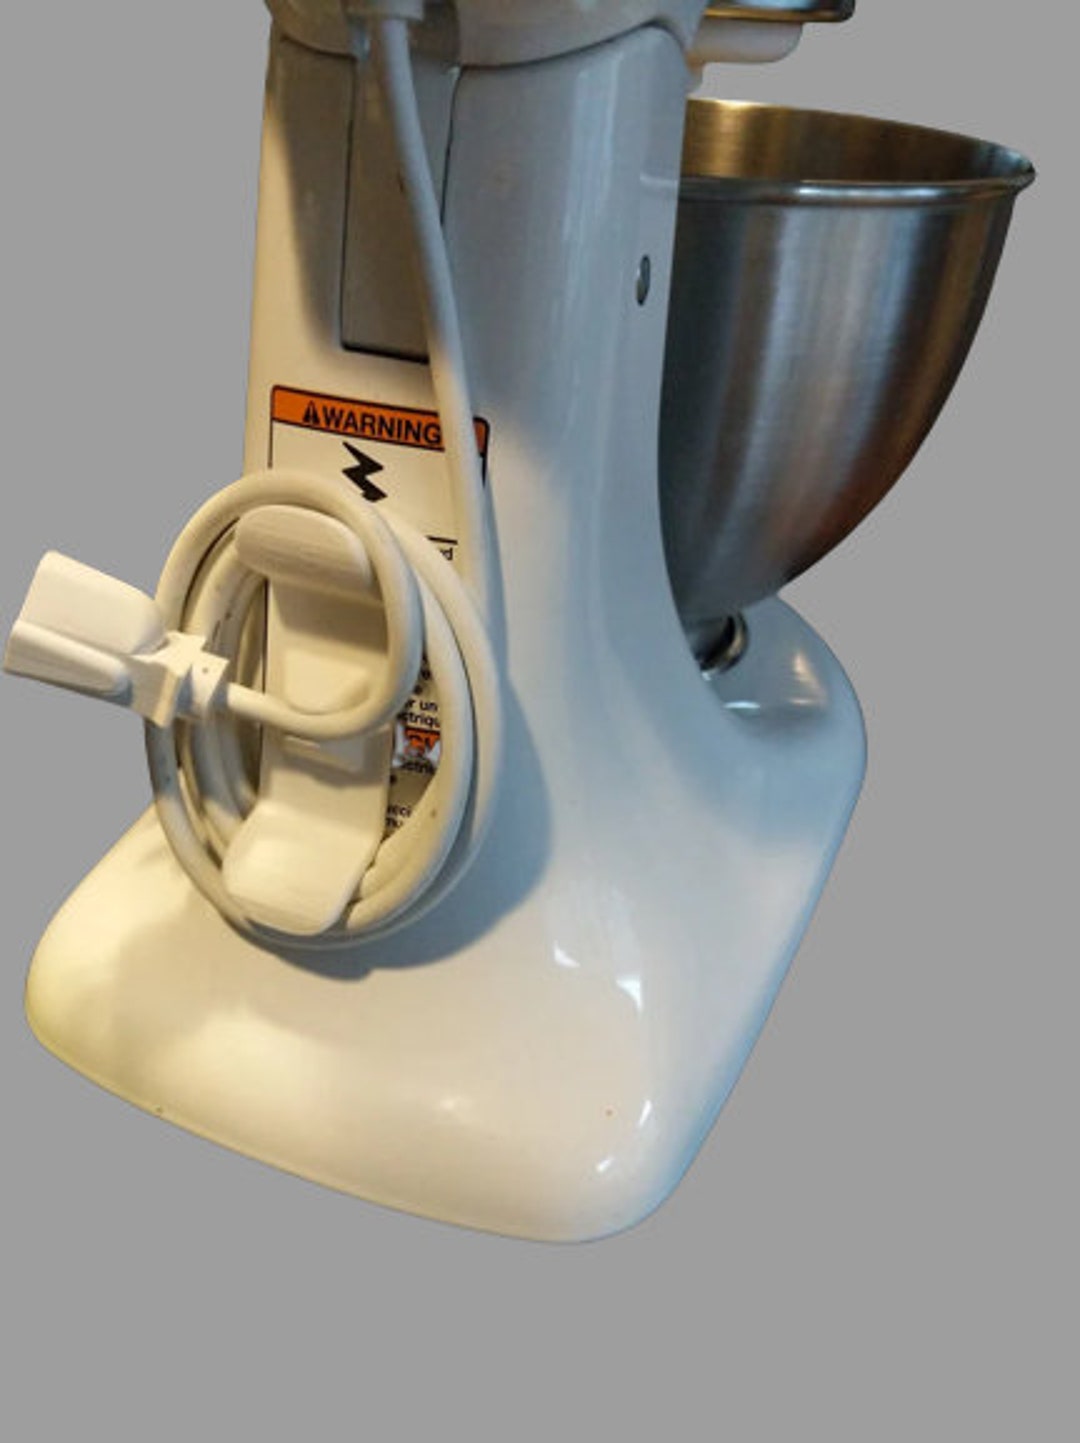 Stand Mixer Cord Hack